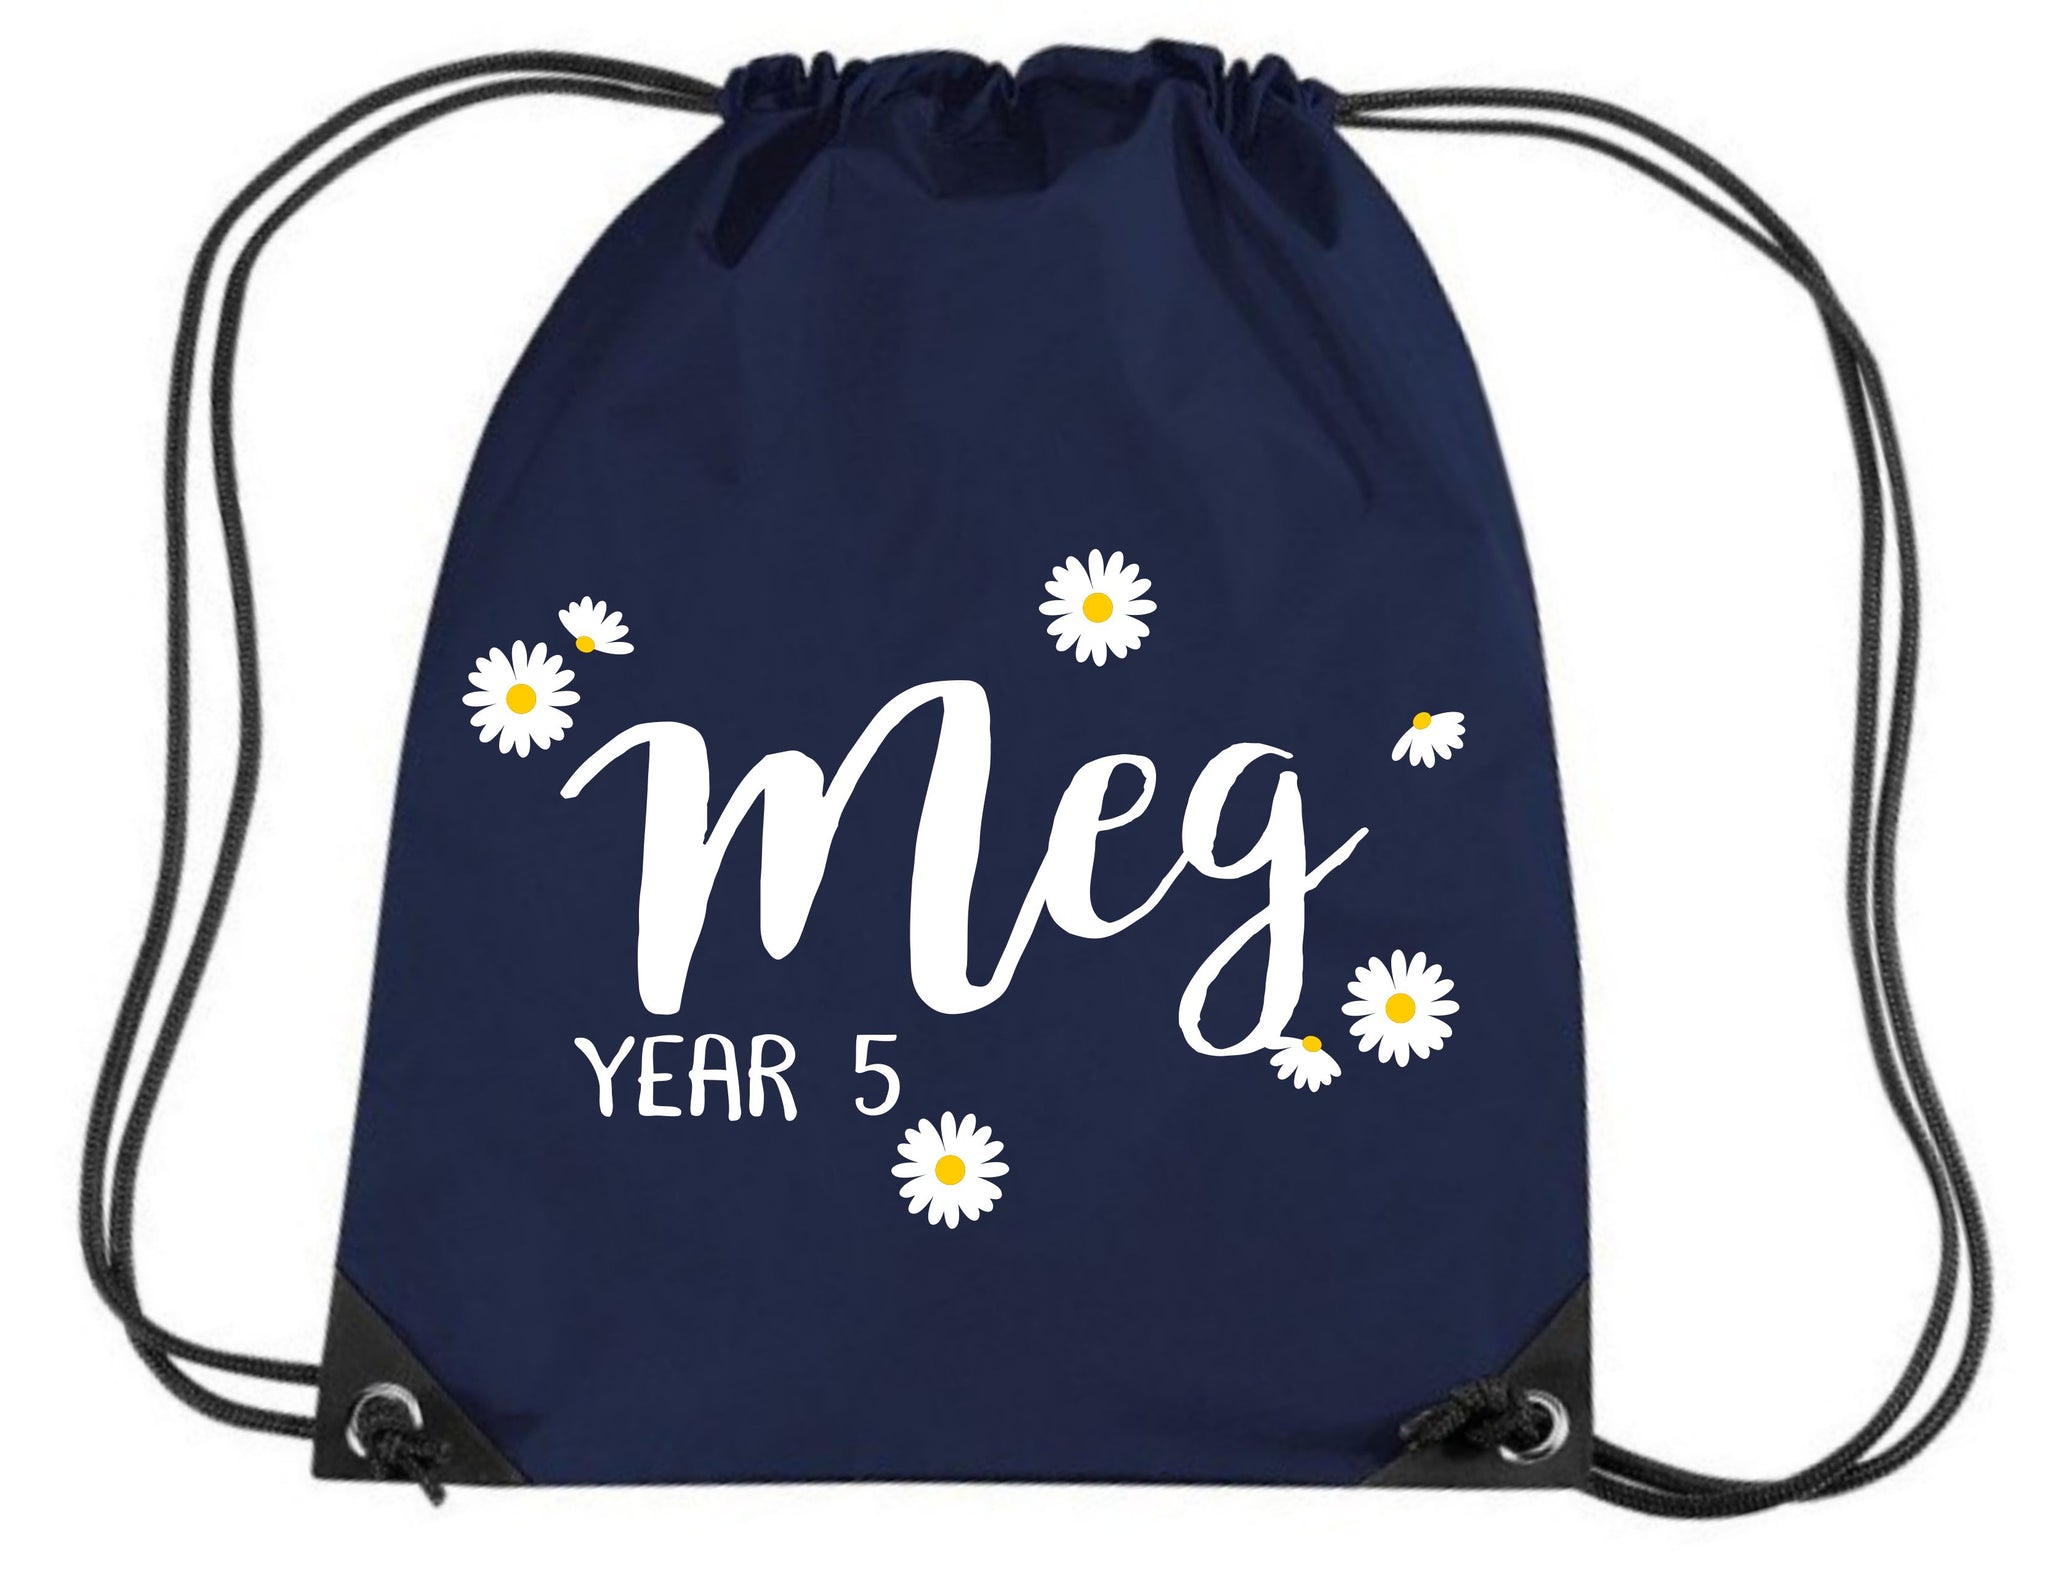 Personalised Daisy Ditsy Drawstring Bag with Name and Class